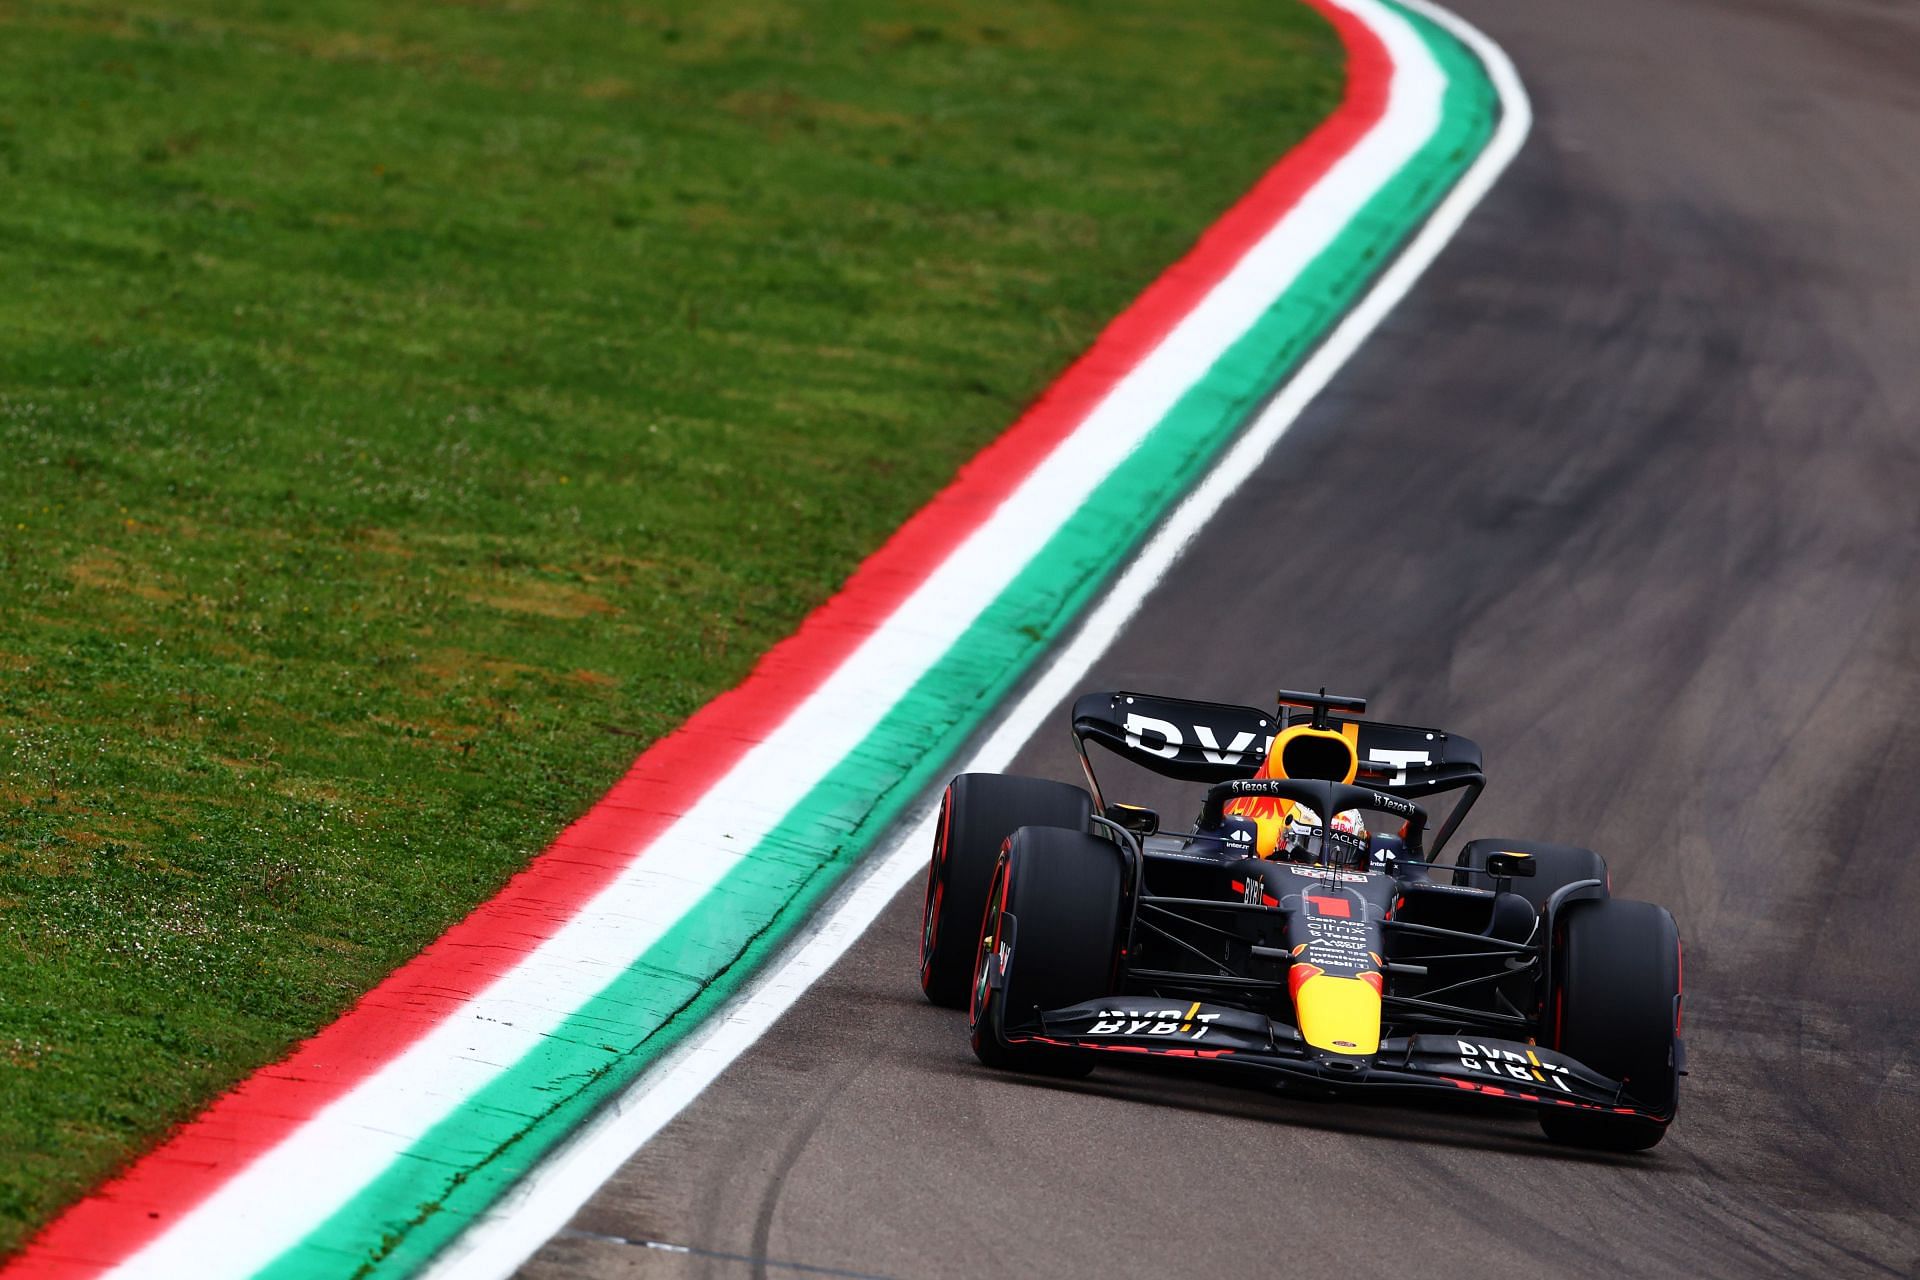 Max Verstappen in action during qualifying for the 2022 F1 Imola GP. (Photo by Mark Thompson/Getty Images)